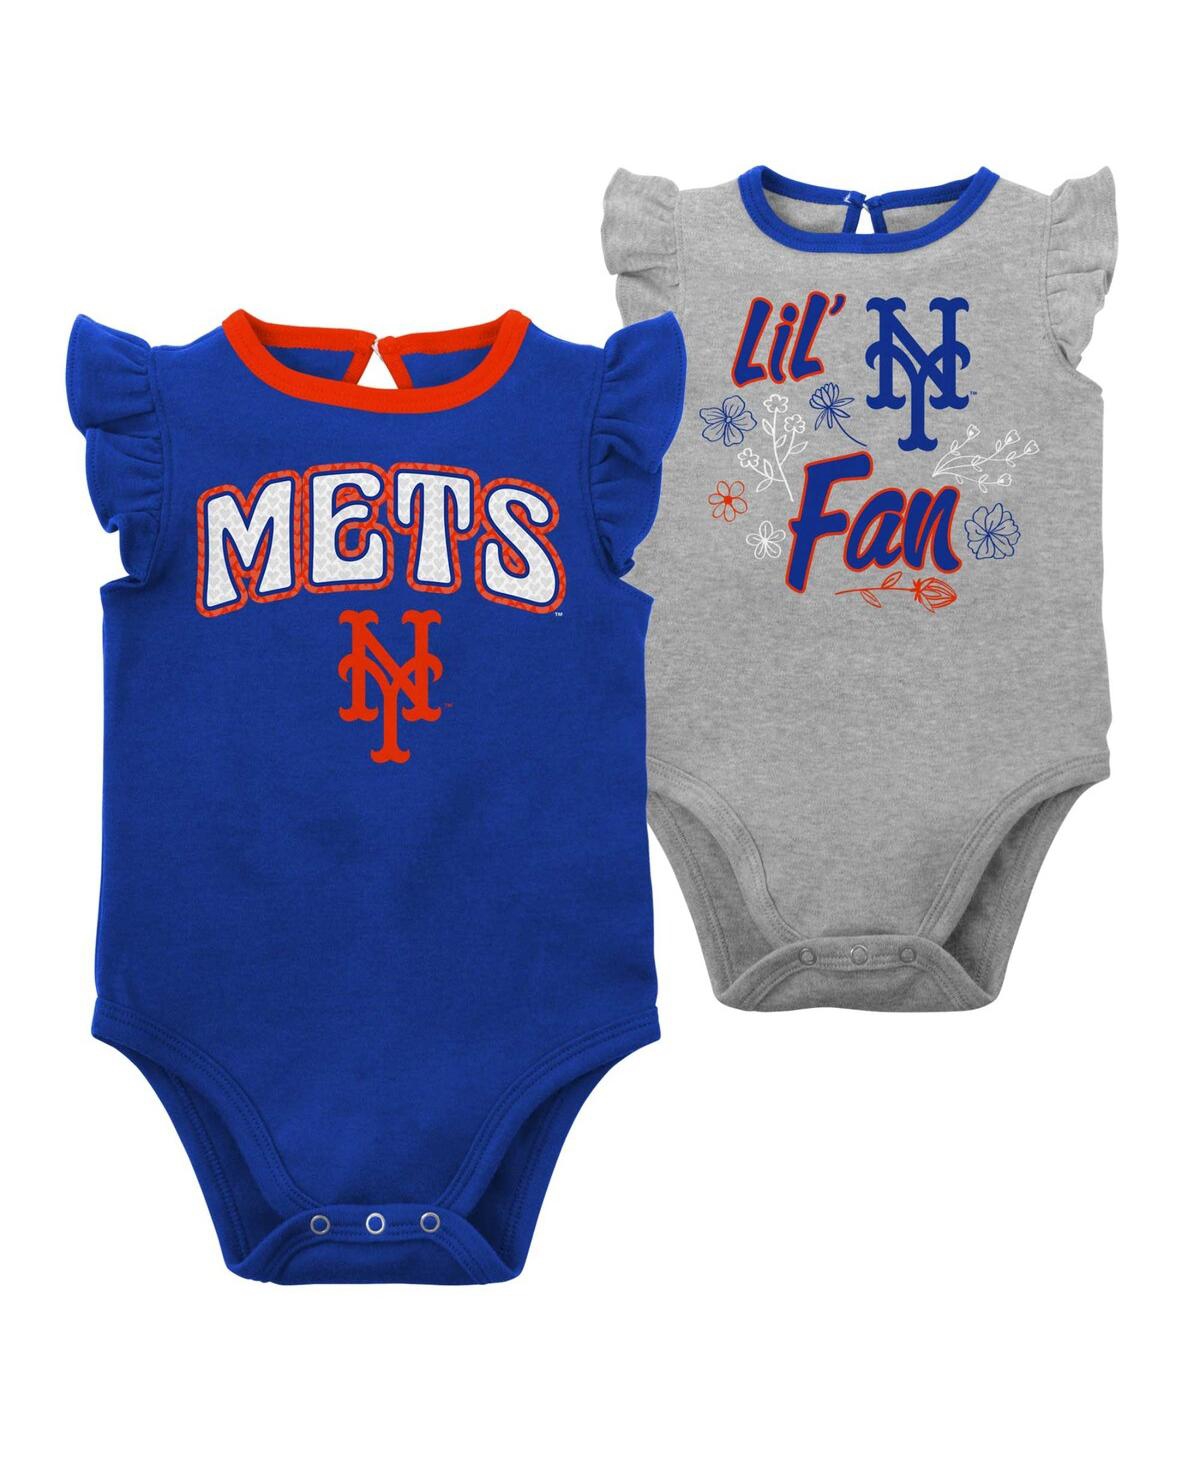 Outerstuff Babies' Newborn And Infant Boys And Girls Royal, Heather Gray New York Mets Little Fan Two-pack Bodysuit Set In Royal,heather Gray